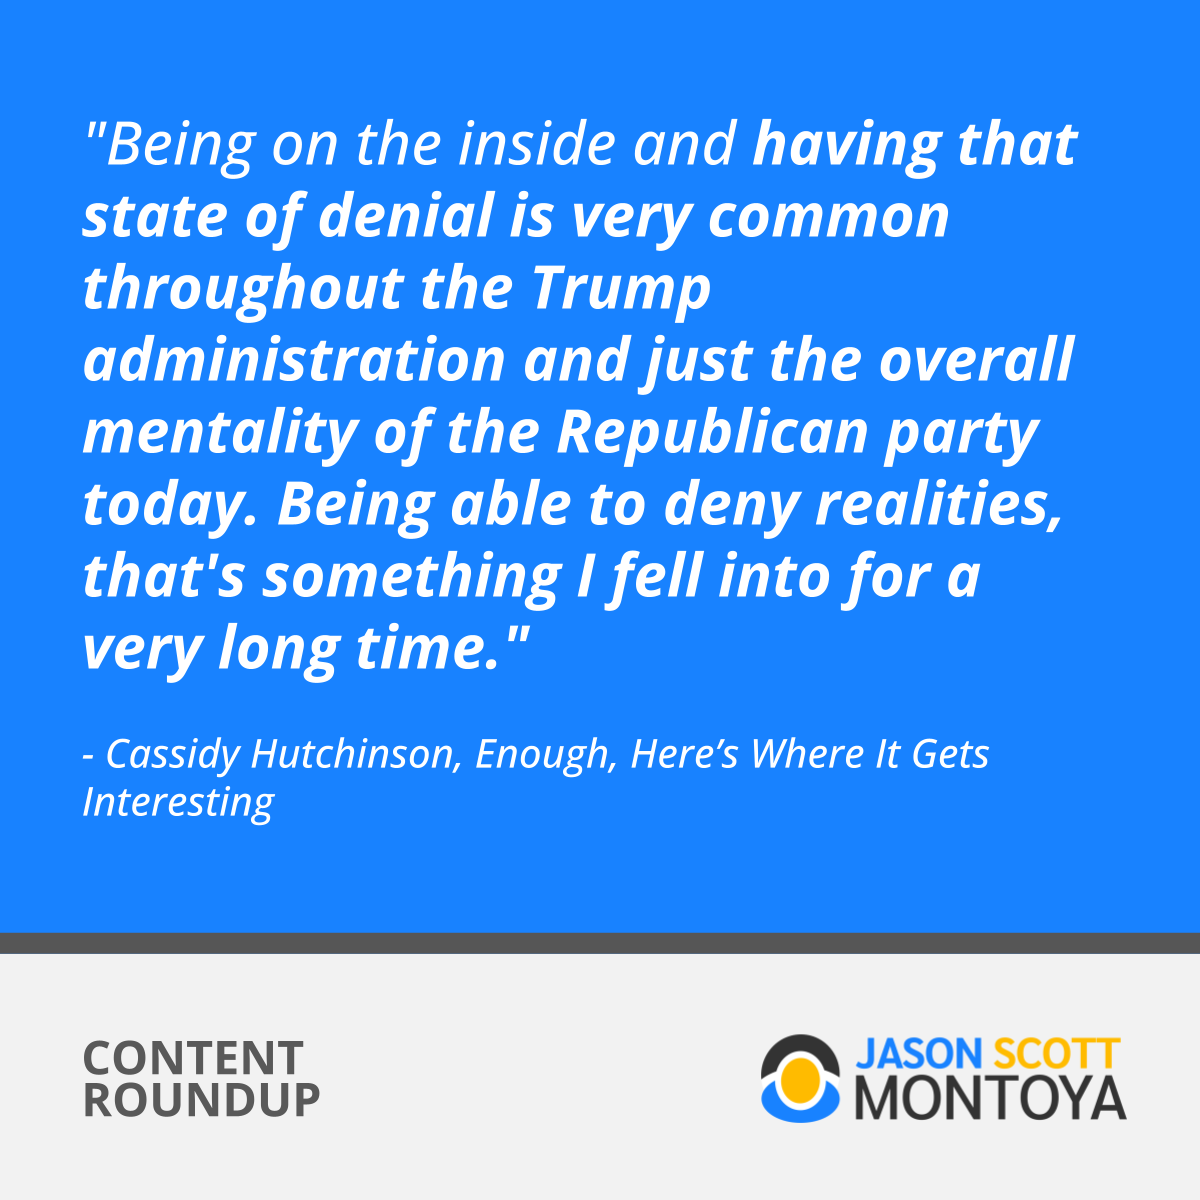 "Being on the inside and having that state of denial is very common throughout the Trump administration and just the overall mentality of the Republican party today. Being able to deny realities, that's something I fell into for a very long time."  - Cassidy Hutchinson, Enough, Here’s Where It Gets Interesting